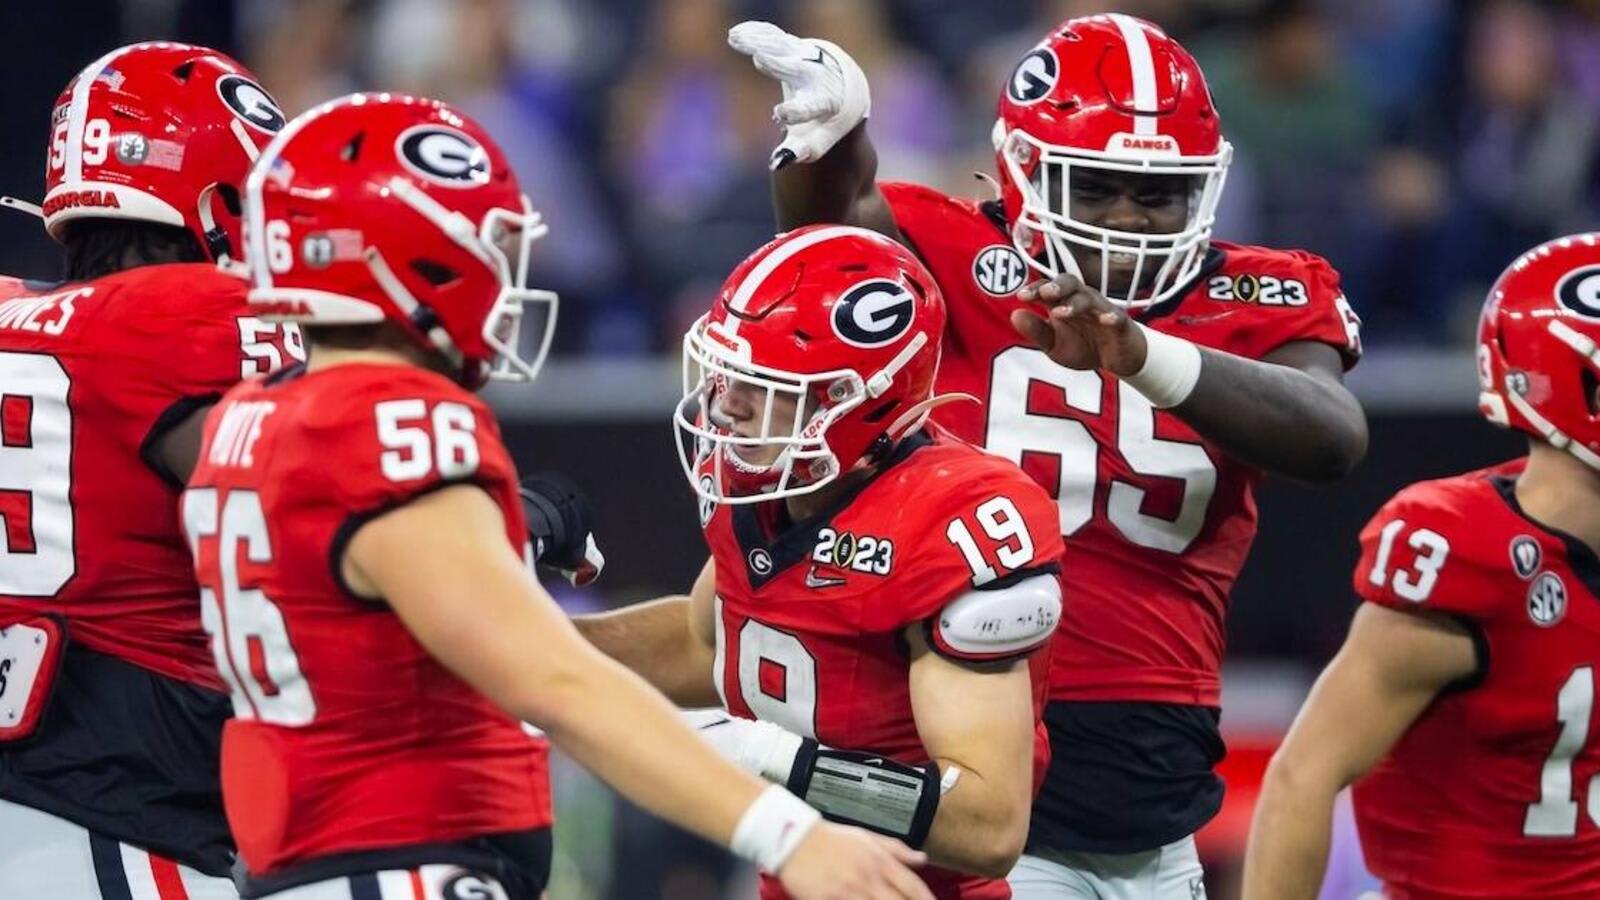 Report: Georgia stars Brock Bowers, Amarius Mims to sit out Pro Day, both will work out April 10